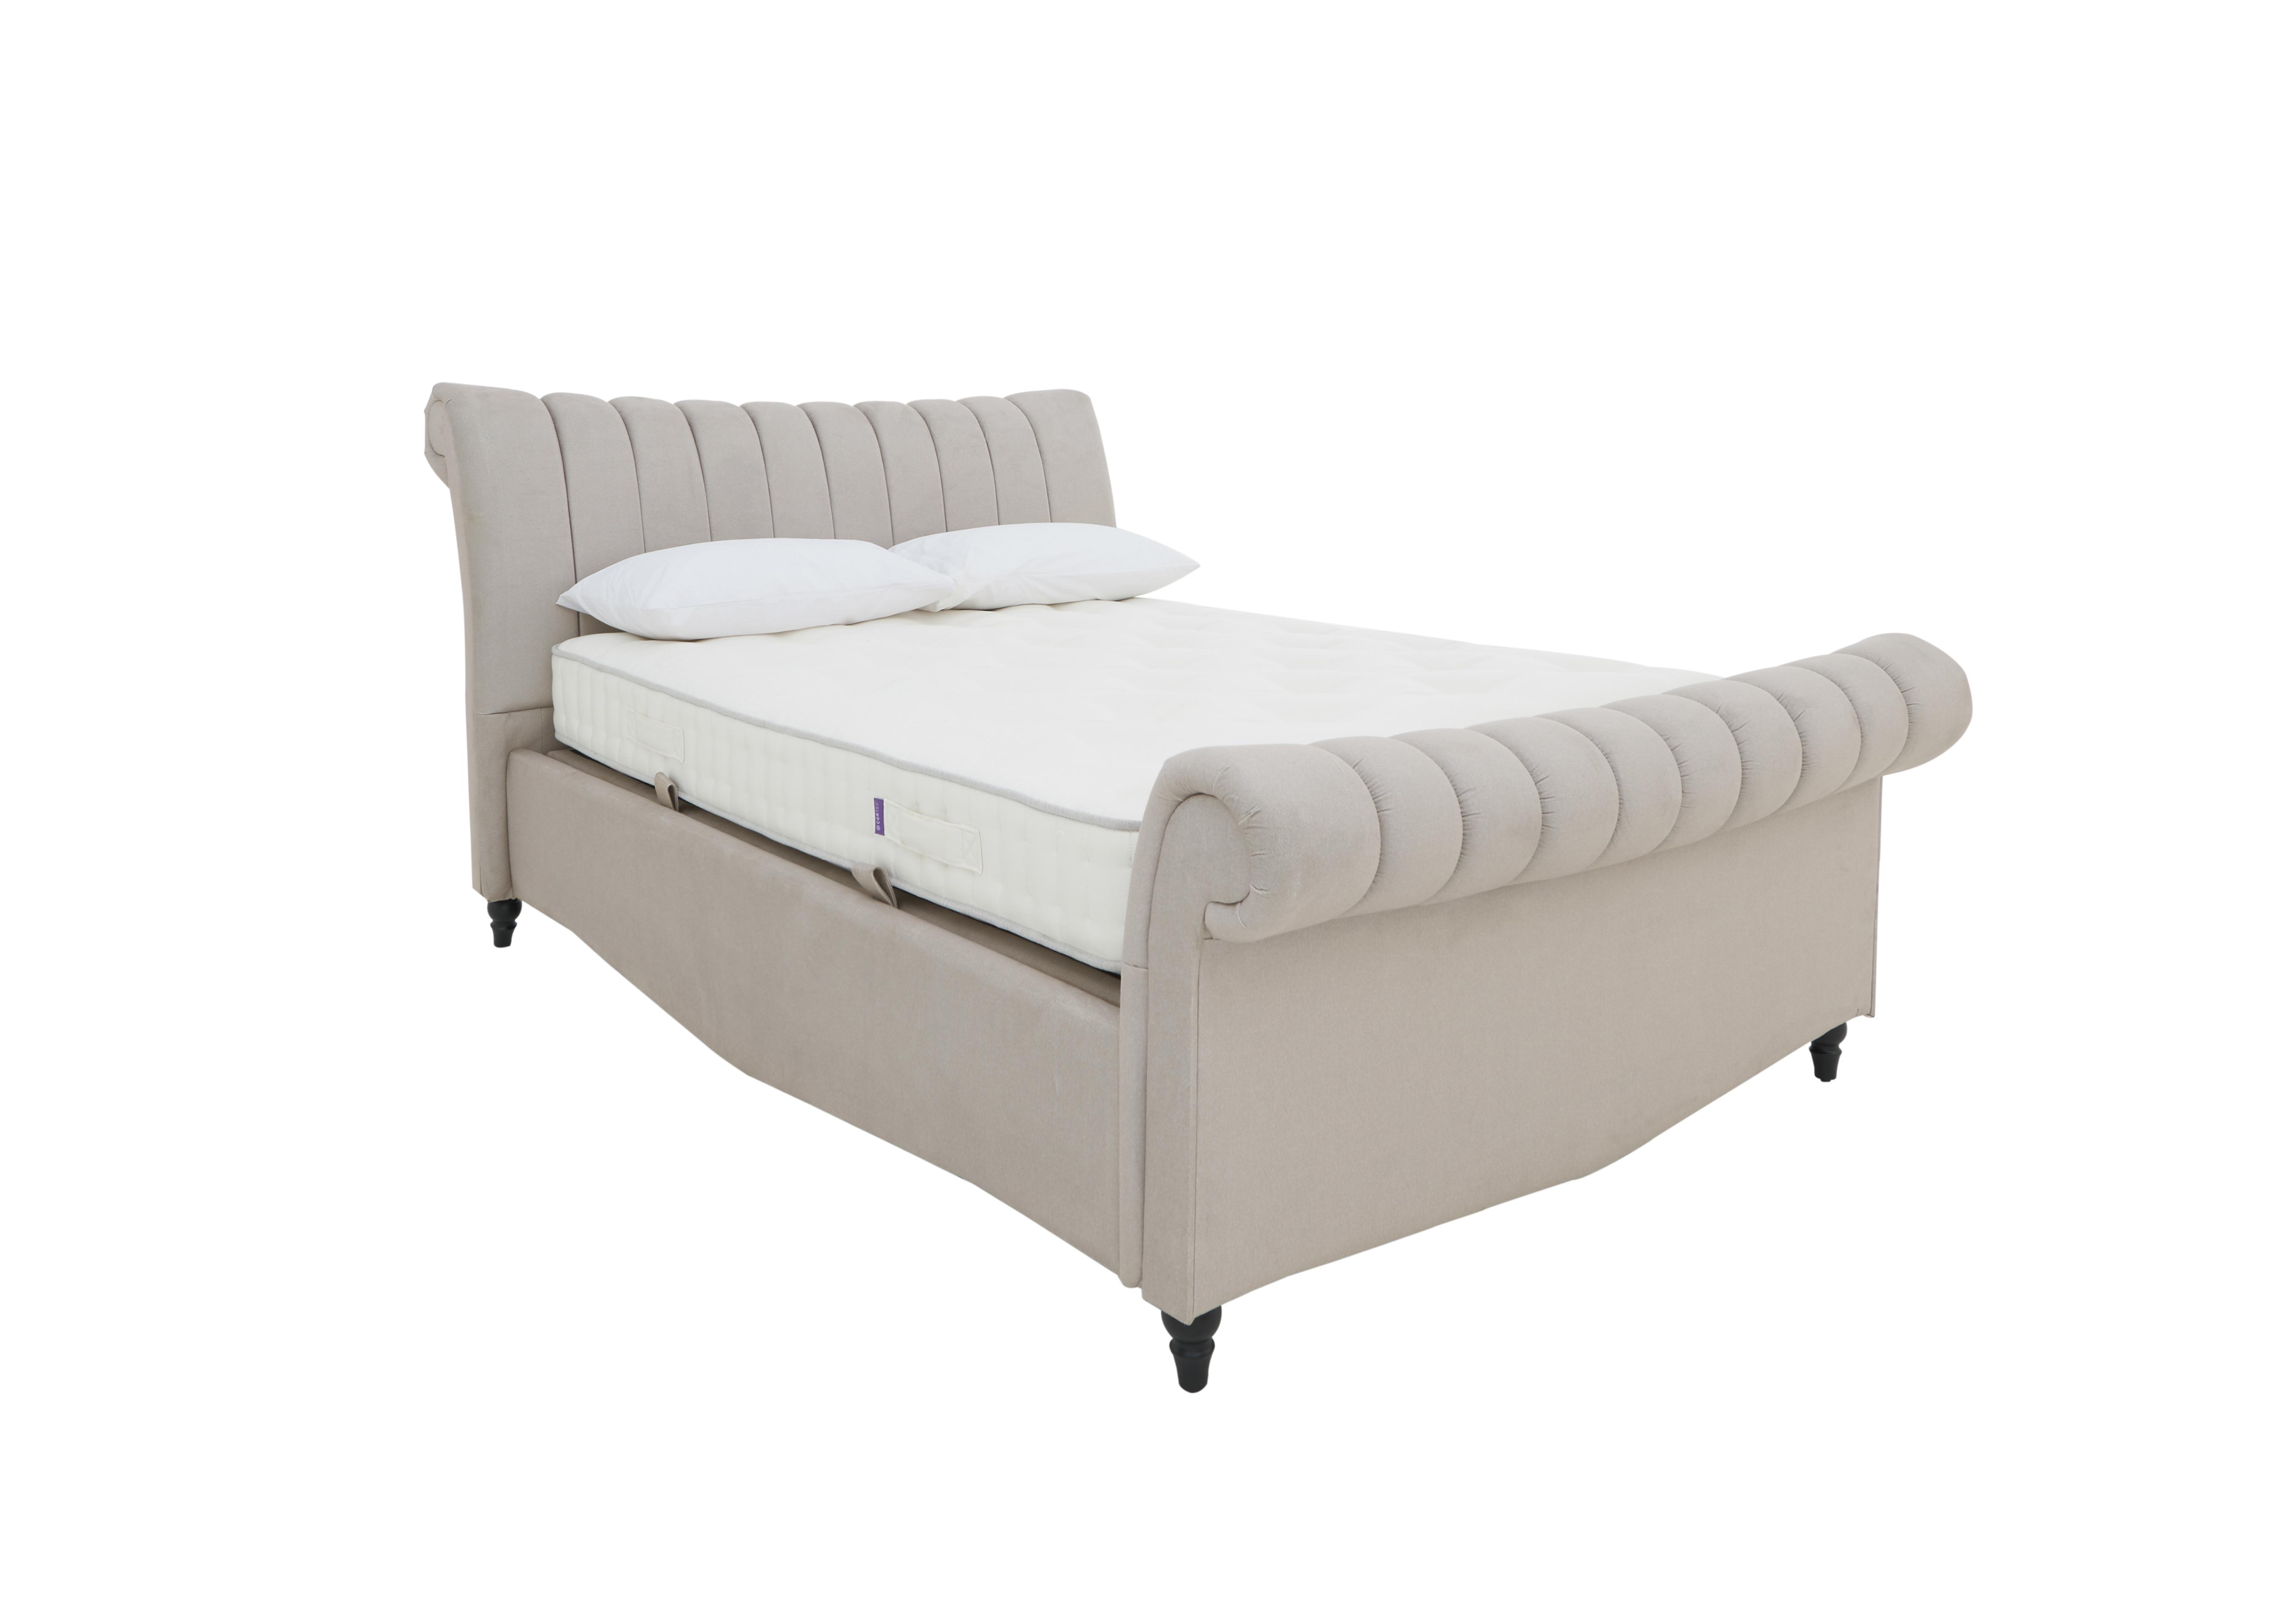 Thiago Ottoman Bed Frame in Smooth Stone on Furniture Village